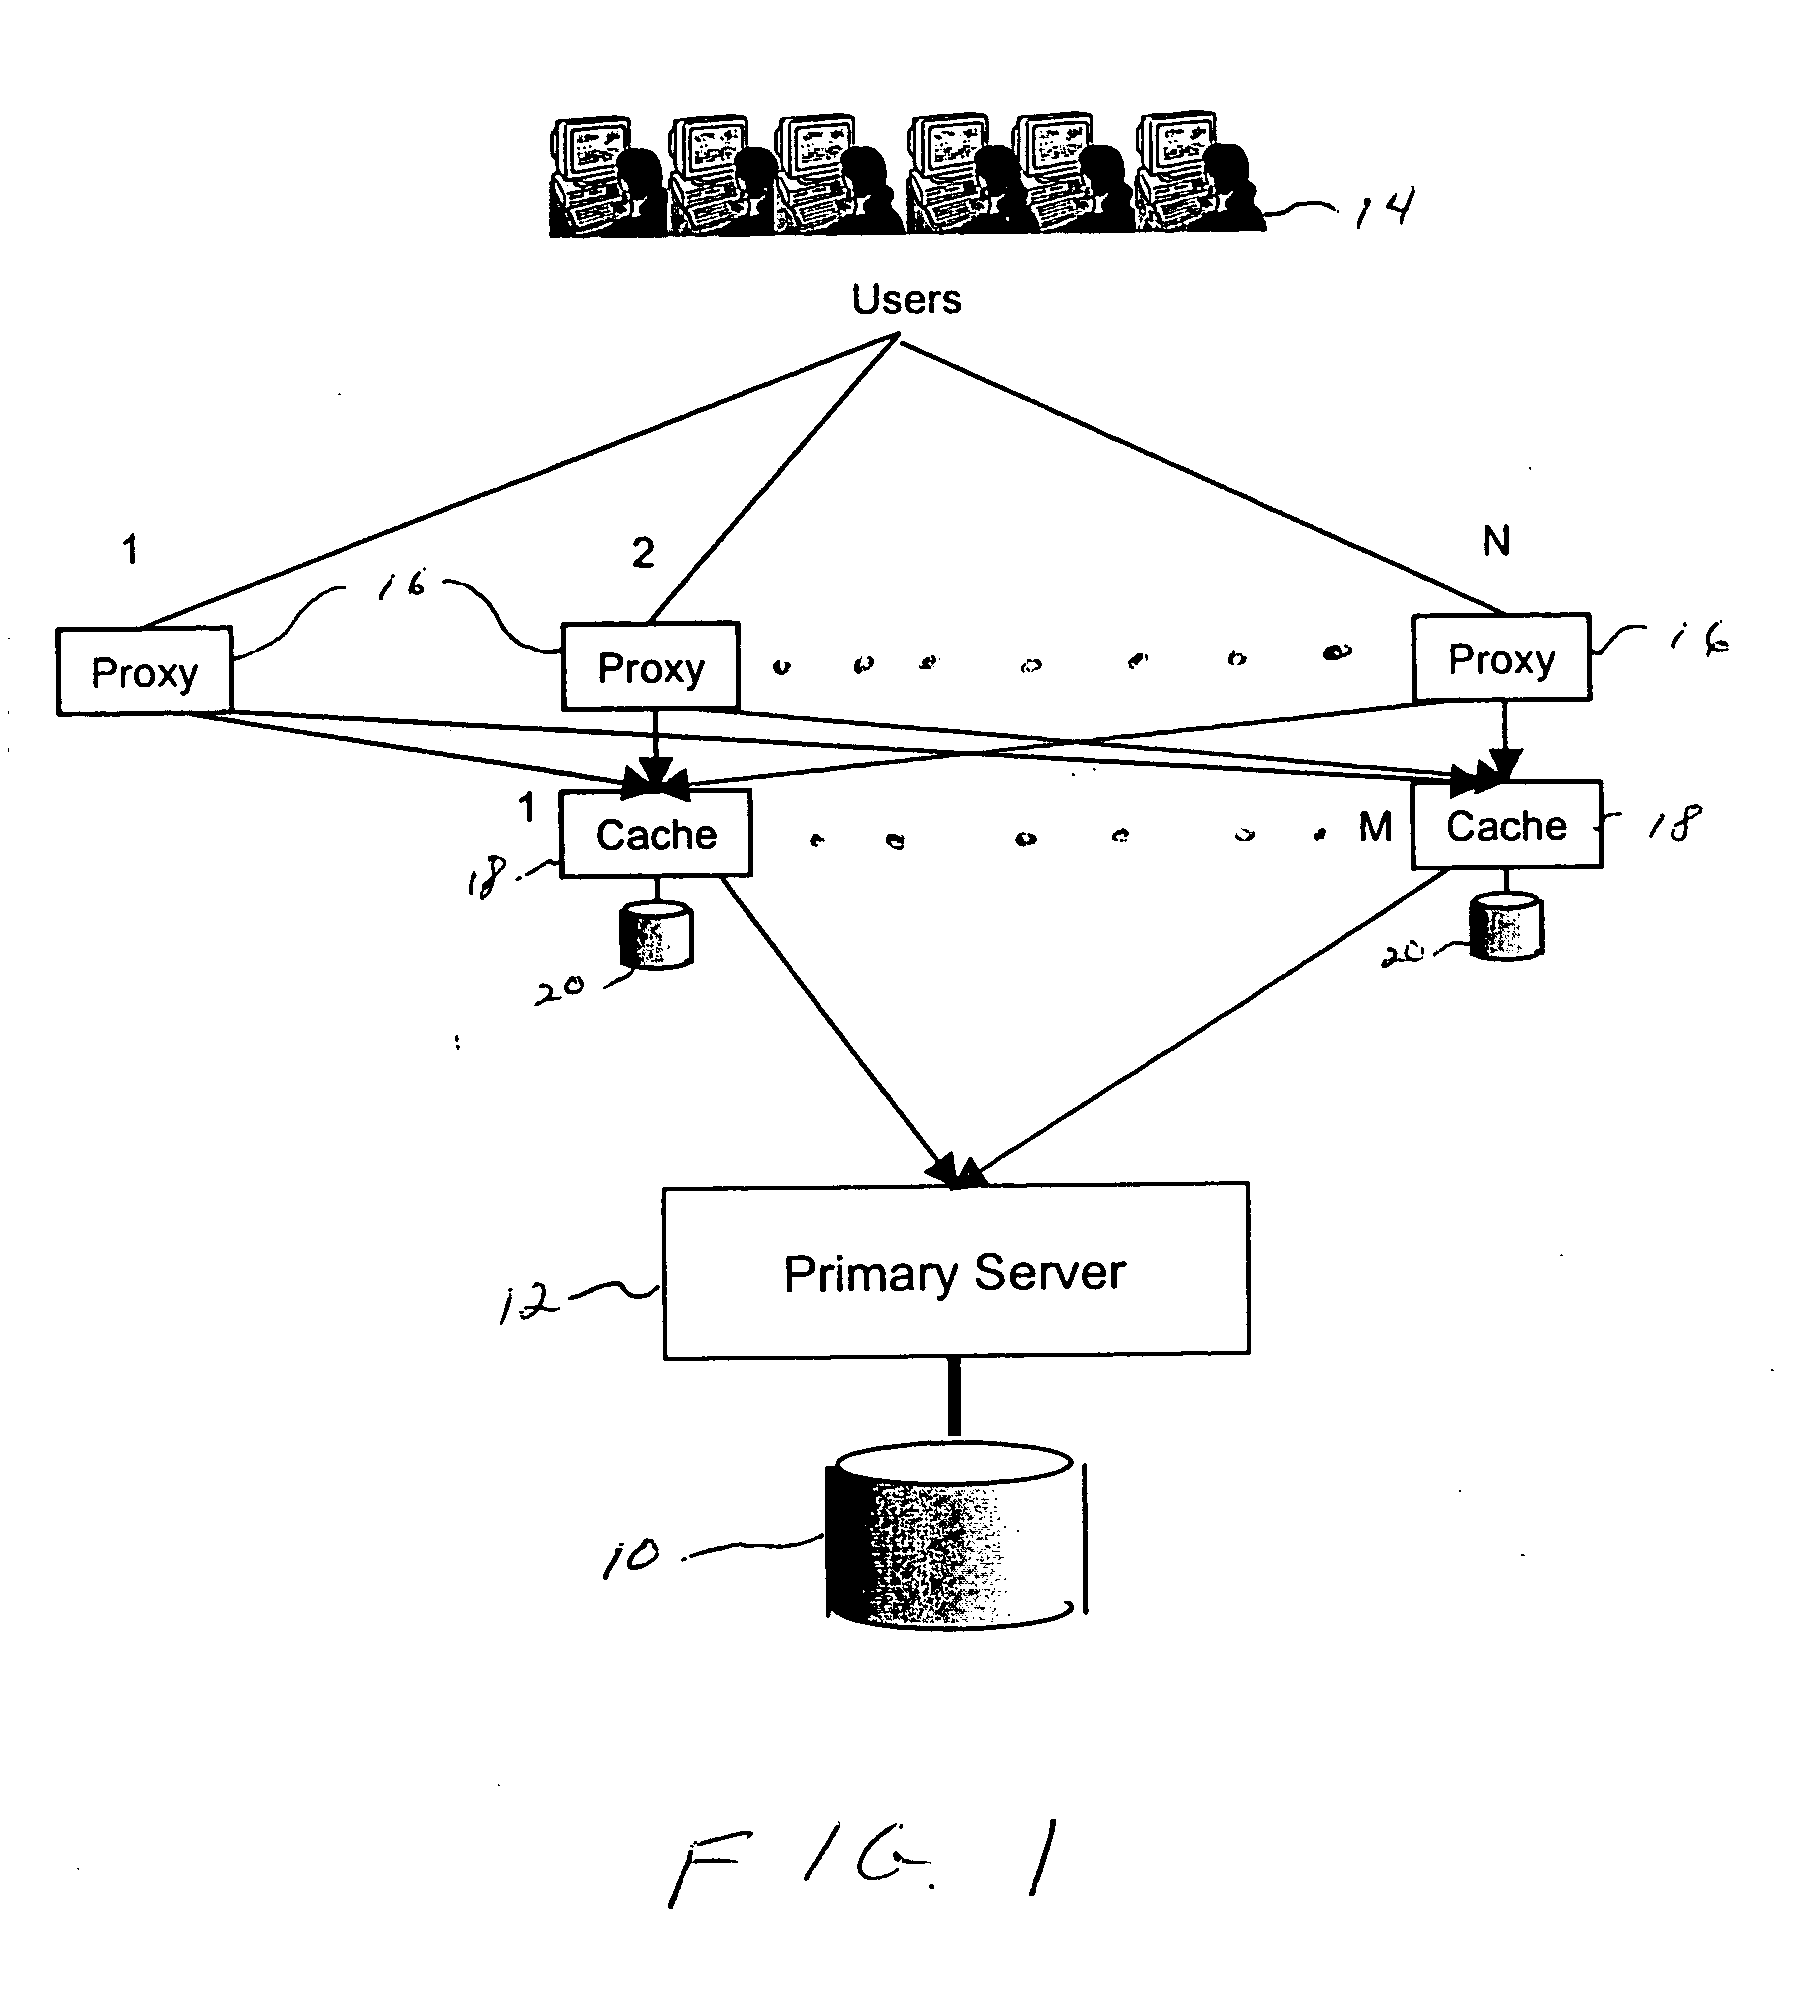 Proxy and cache architecture for document storage